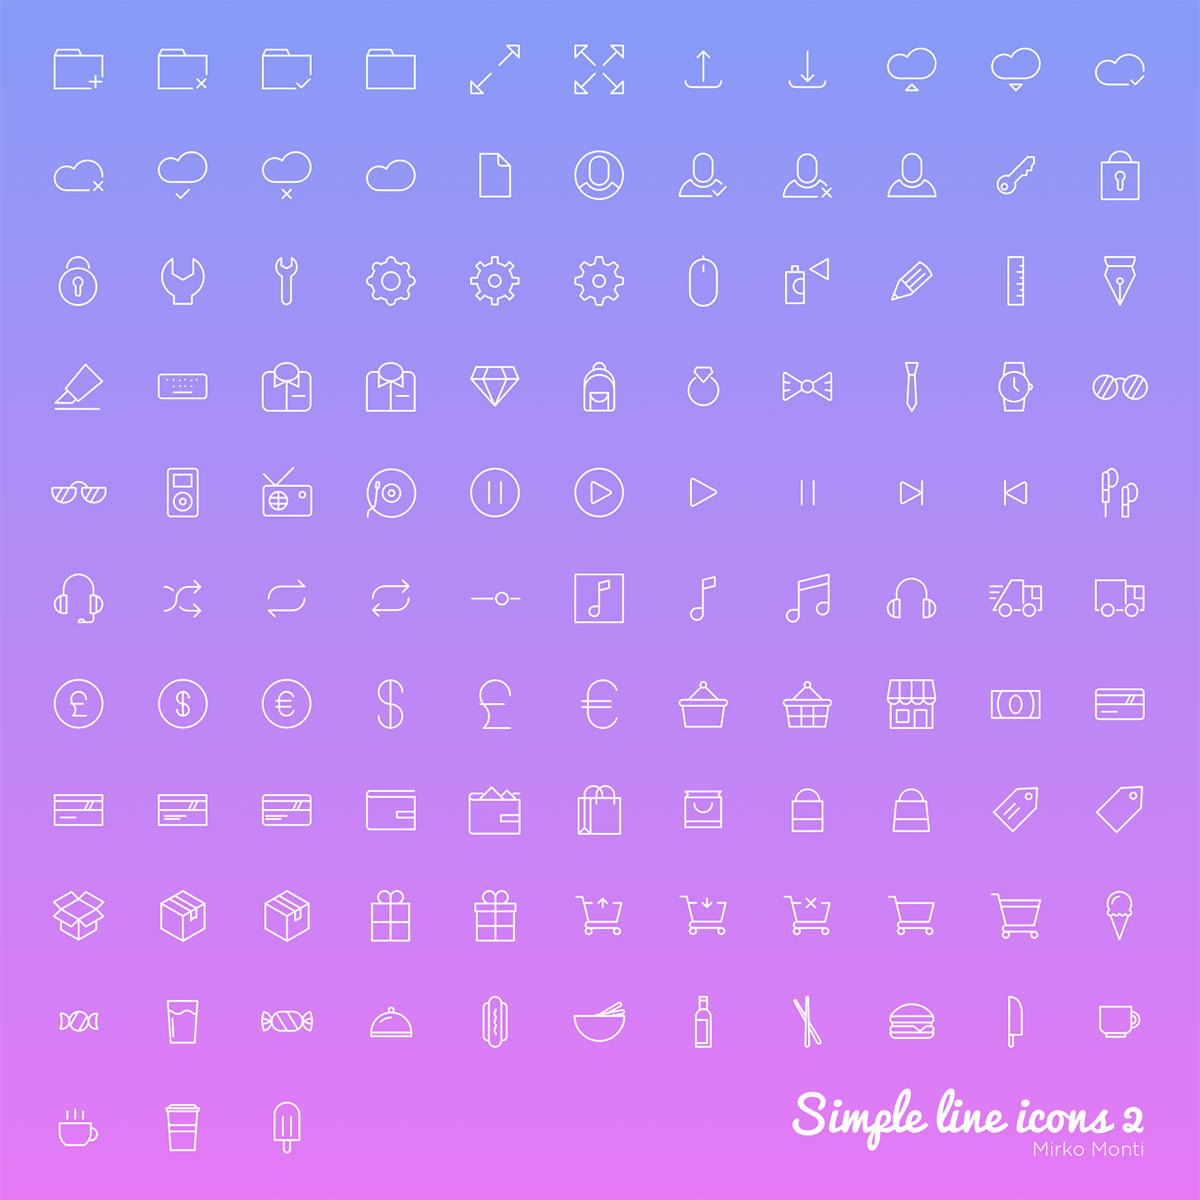 Simple Line Icons 2 - 100+ free icons